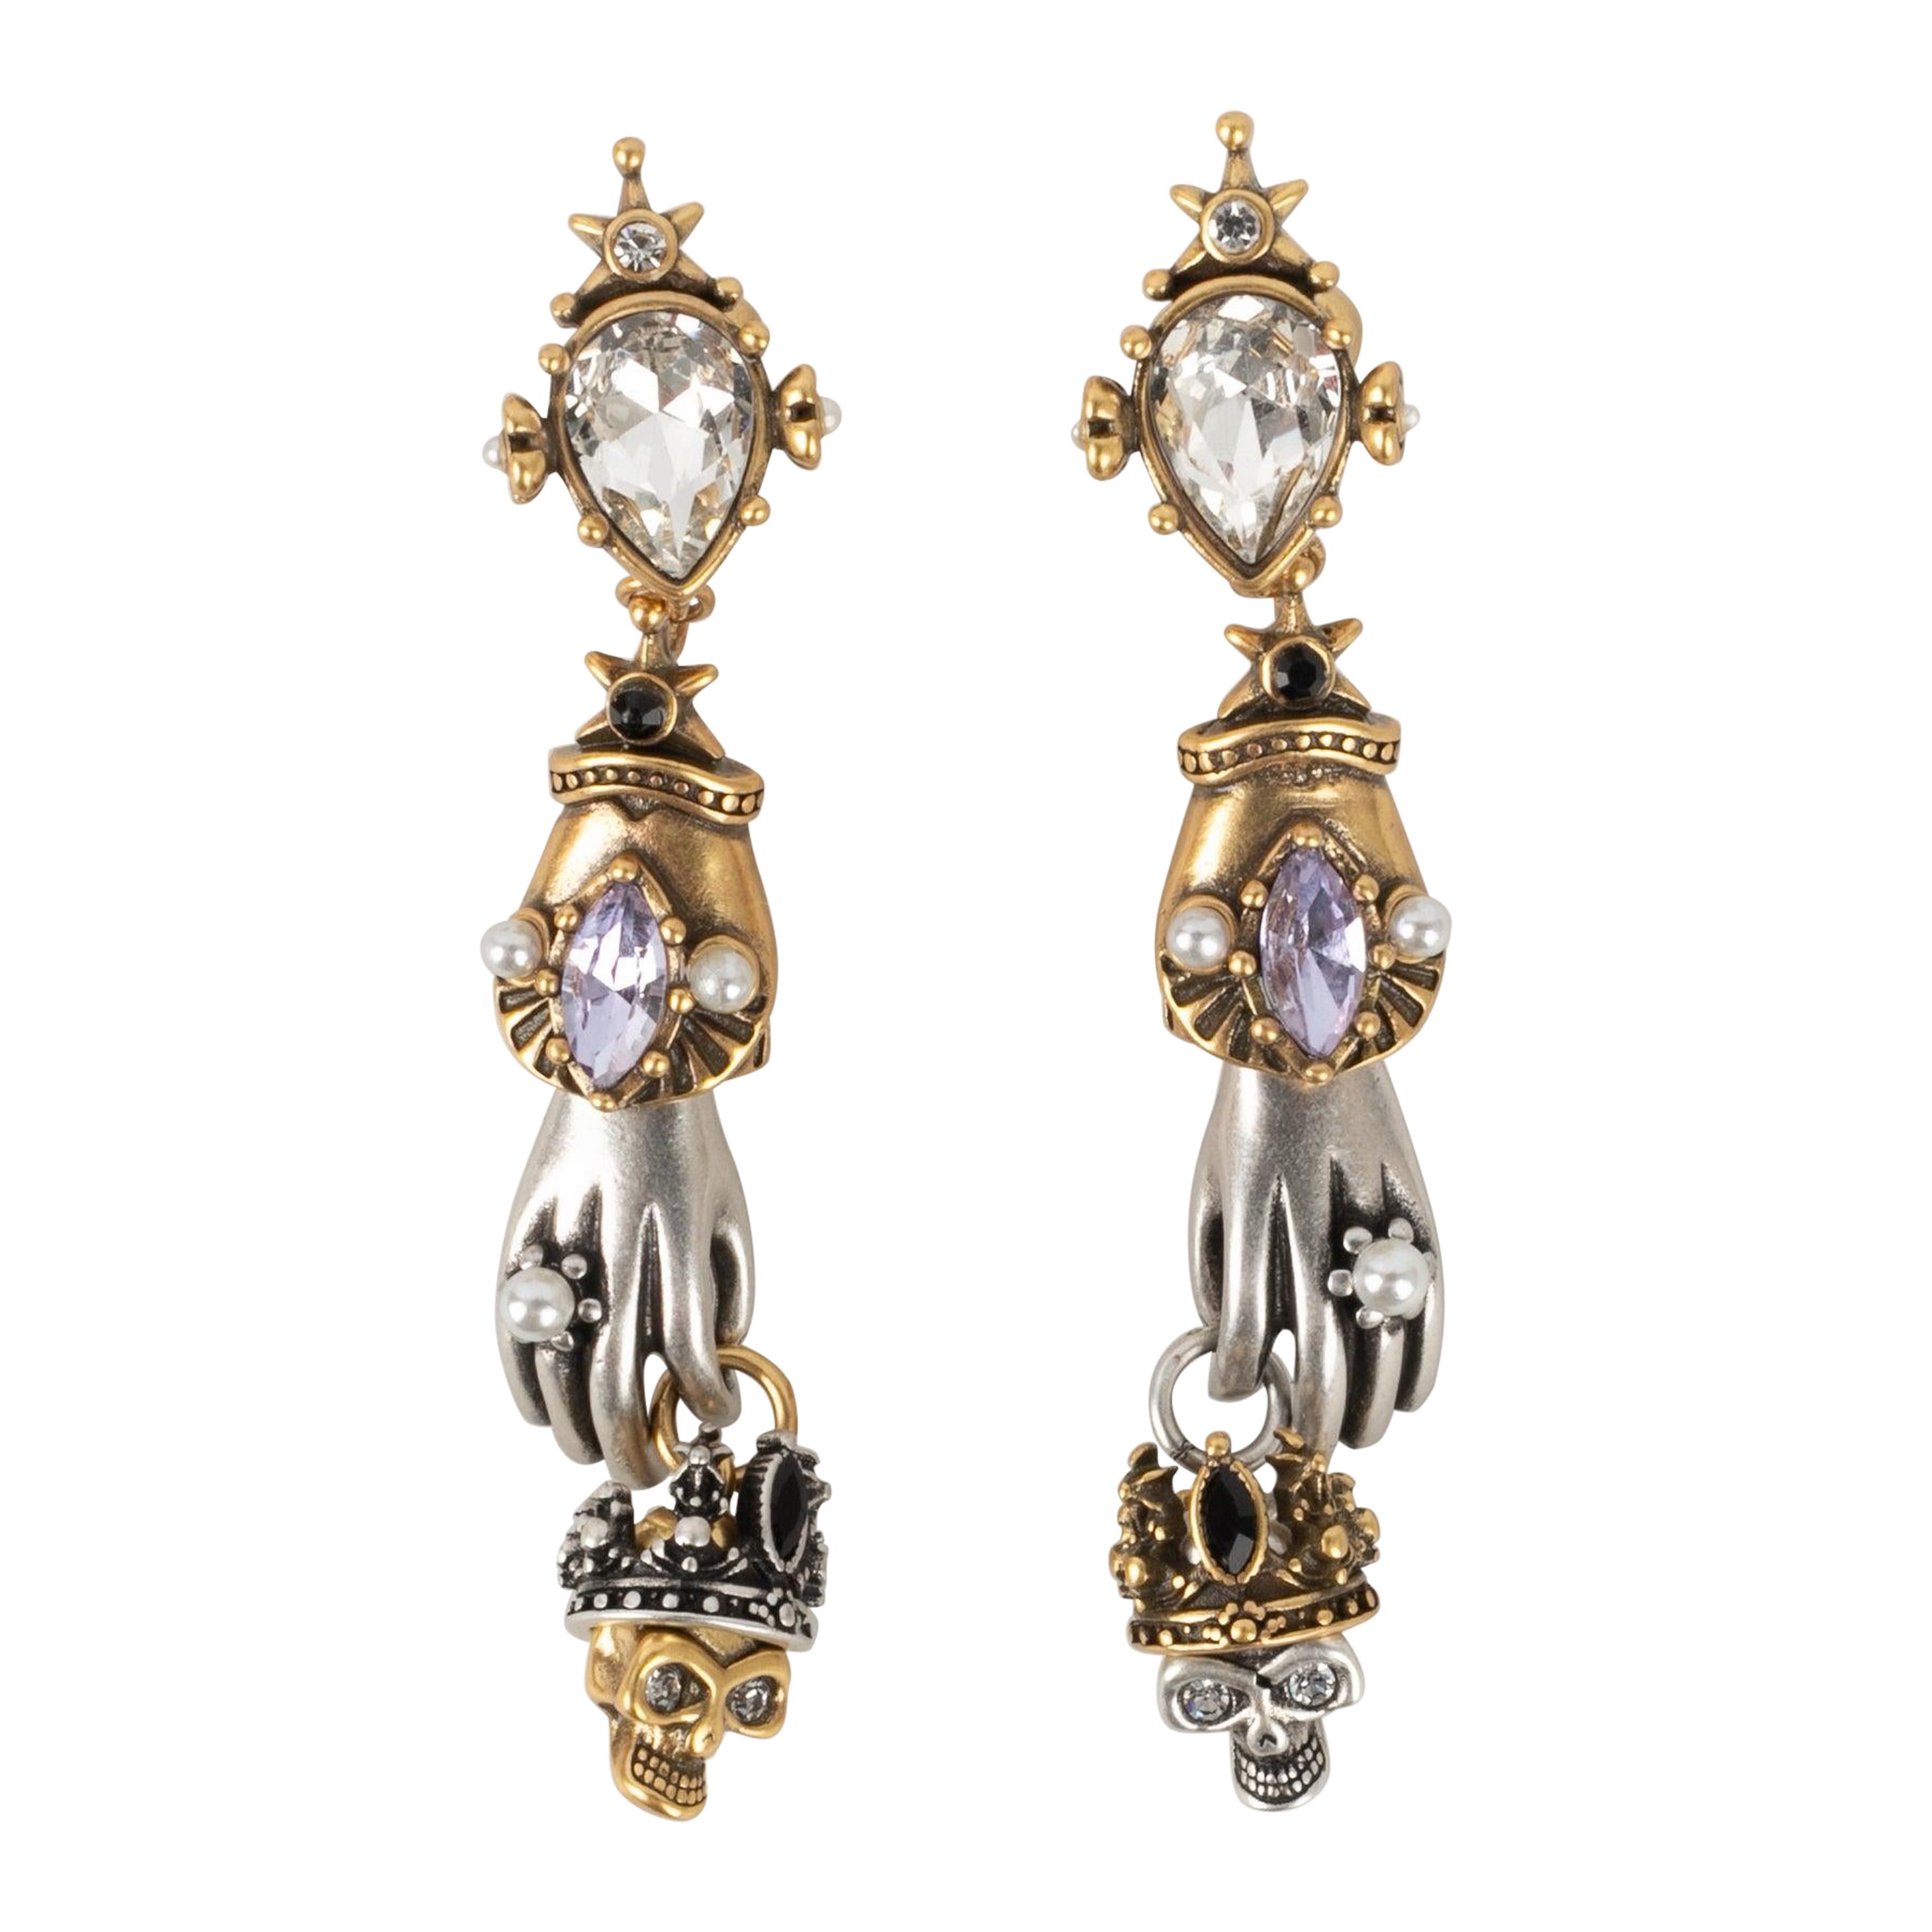 Alexander Mc Queen Golden and Silvery Metal Earrings Ornamented with Rhinestones